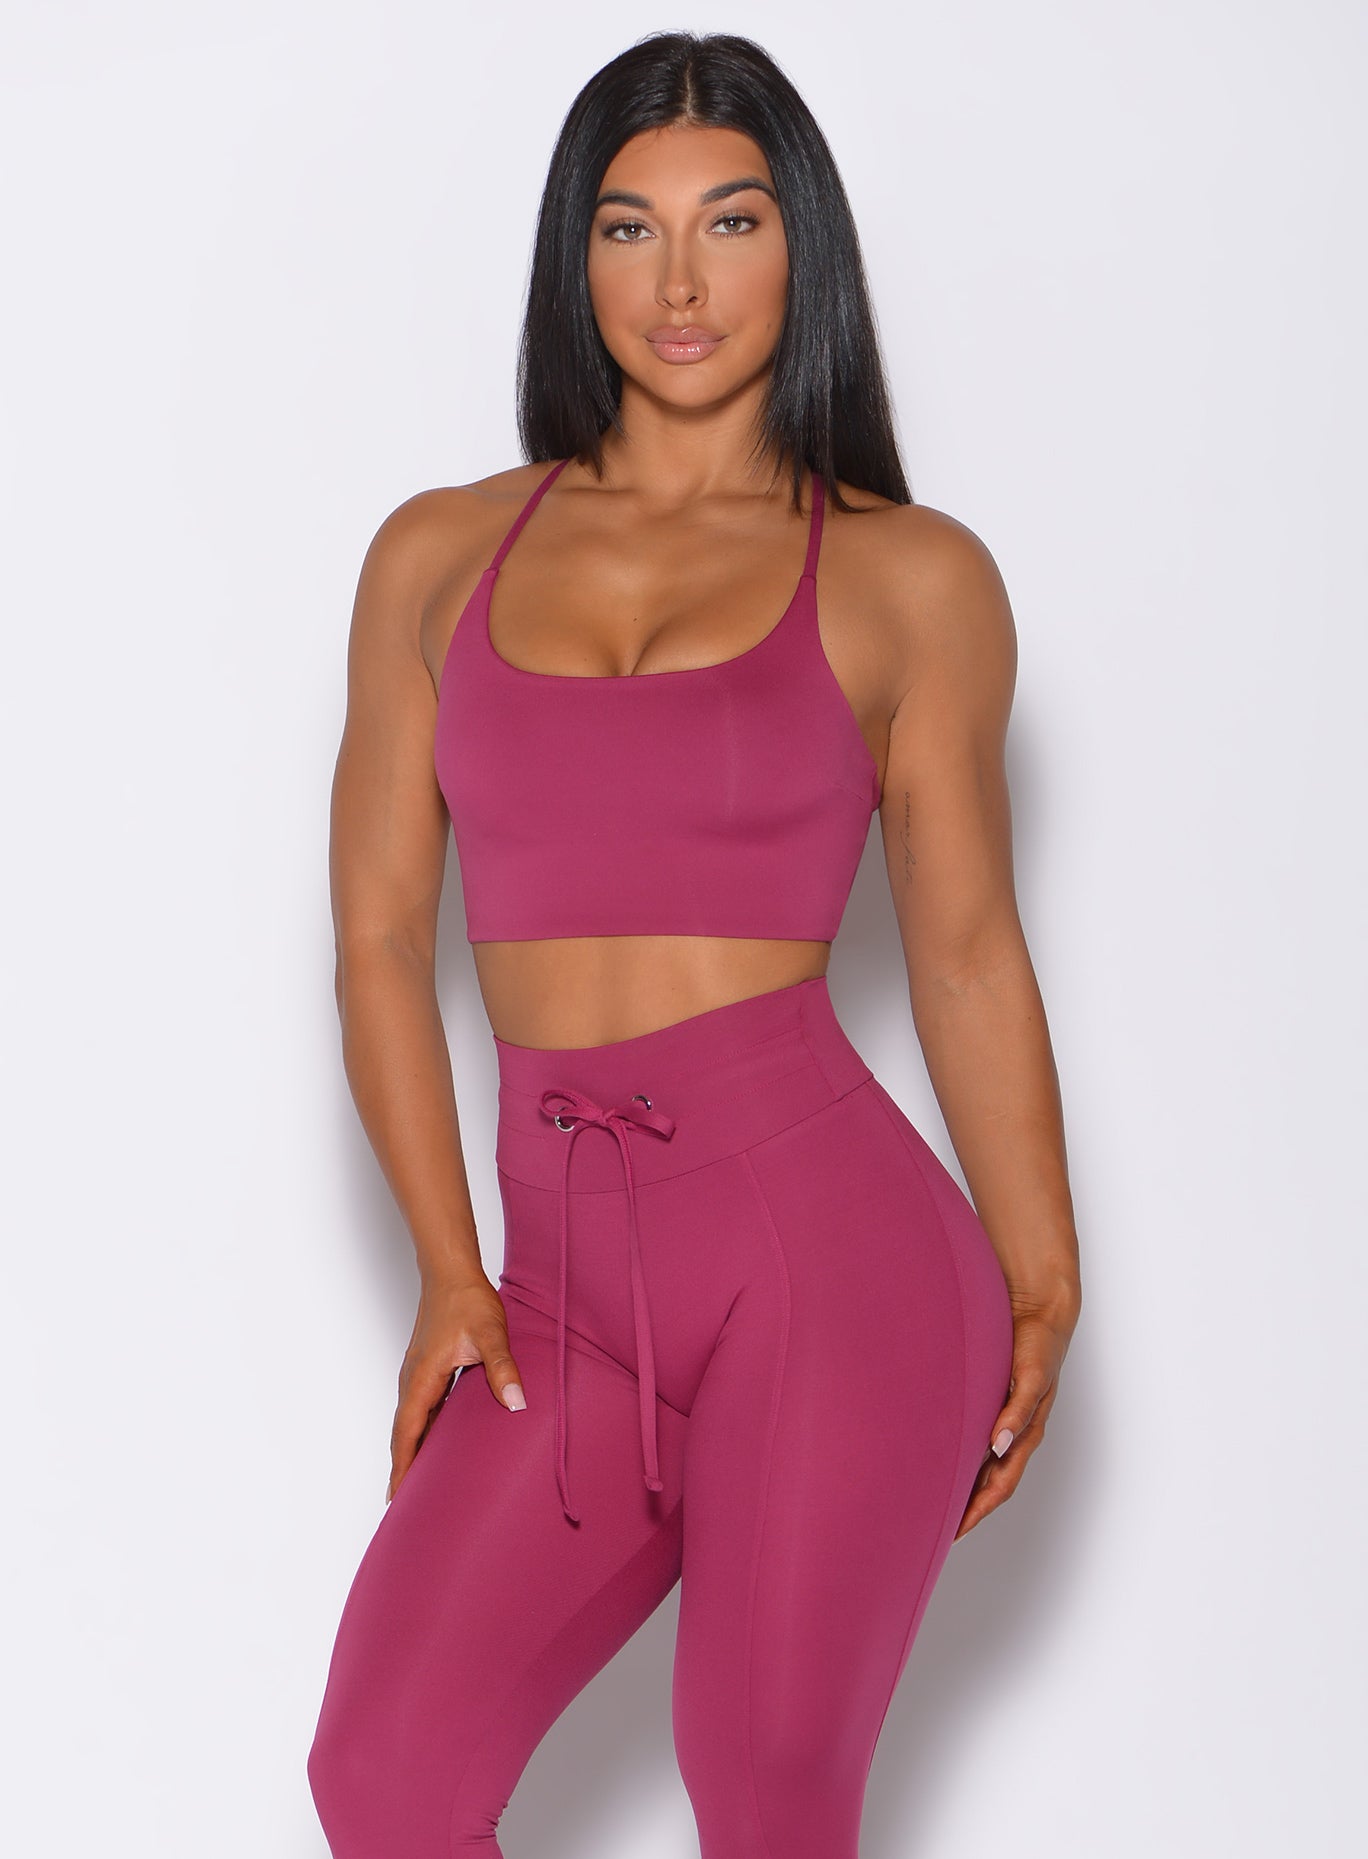 Model facing forward wearing our cross fit sports bra in berry good color and a matching leggings